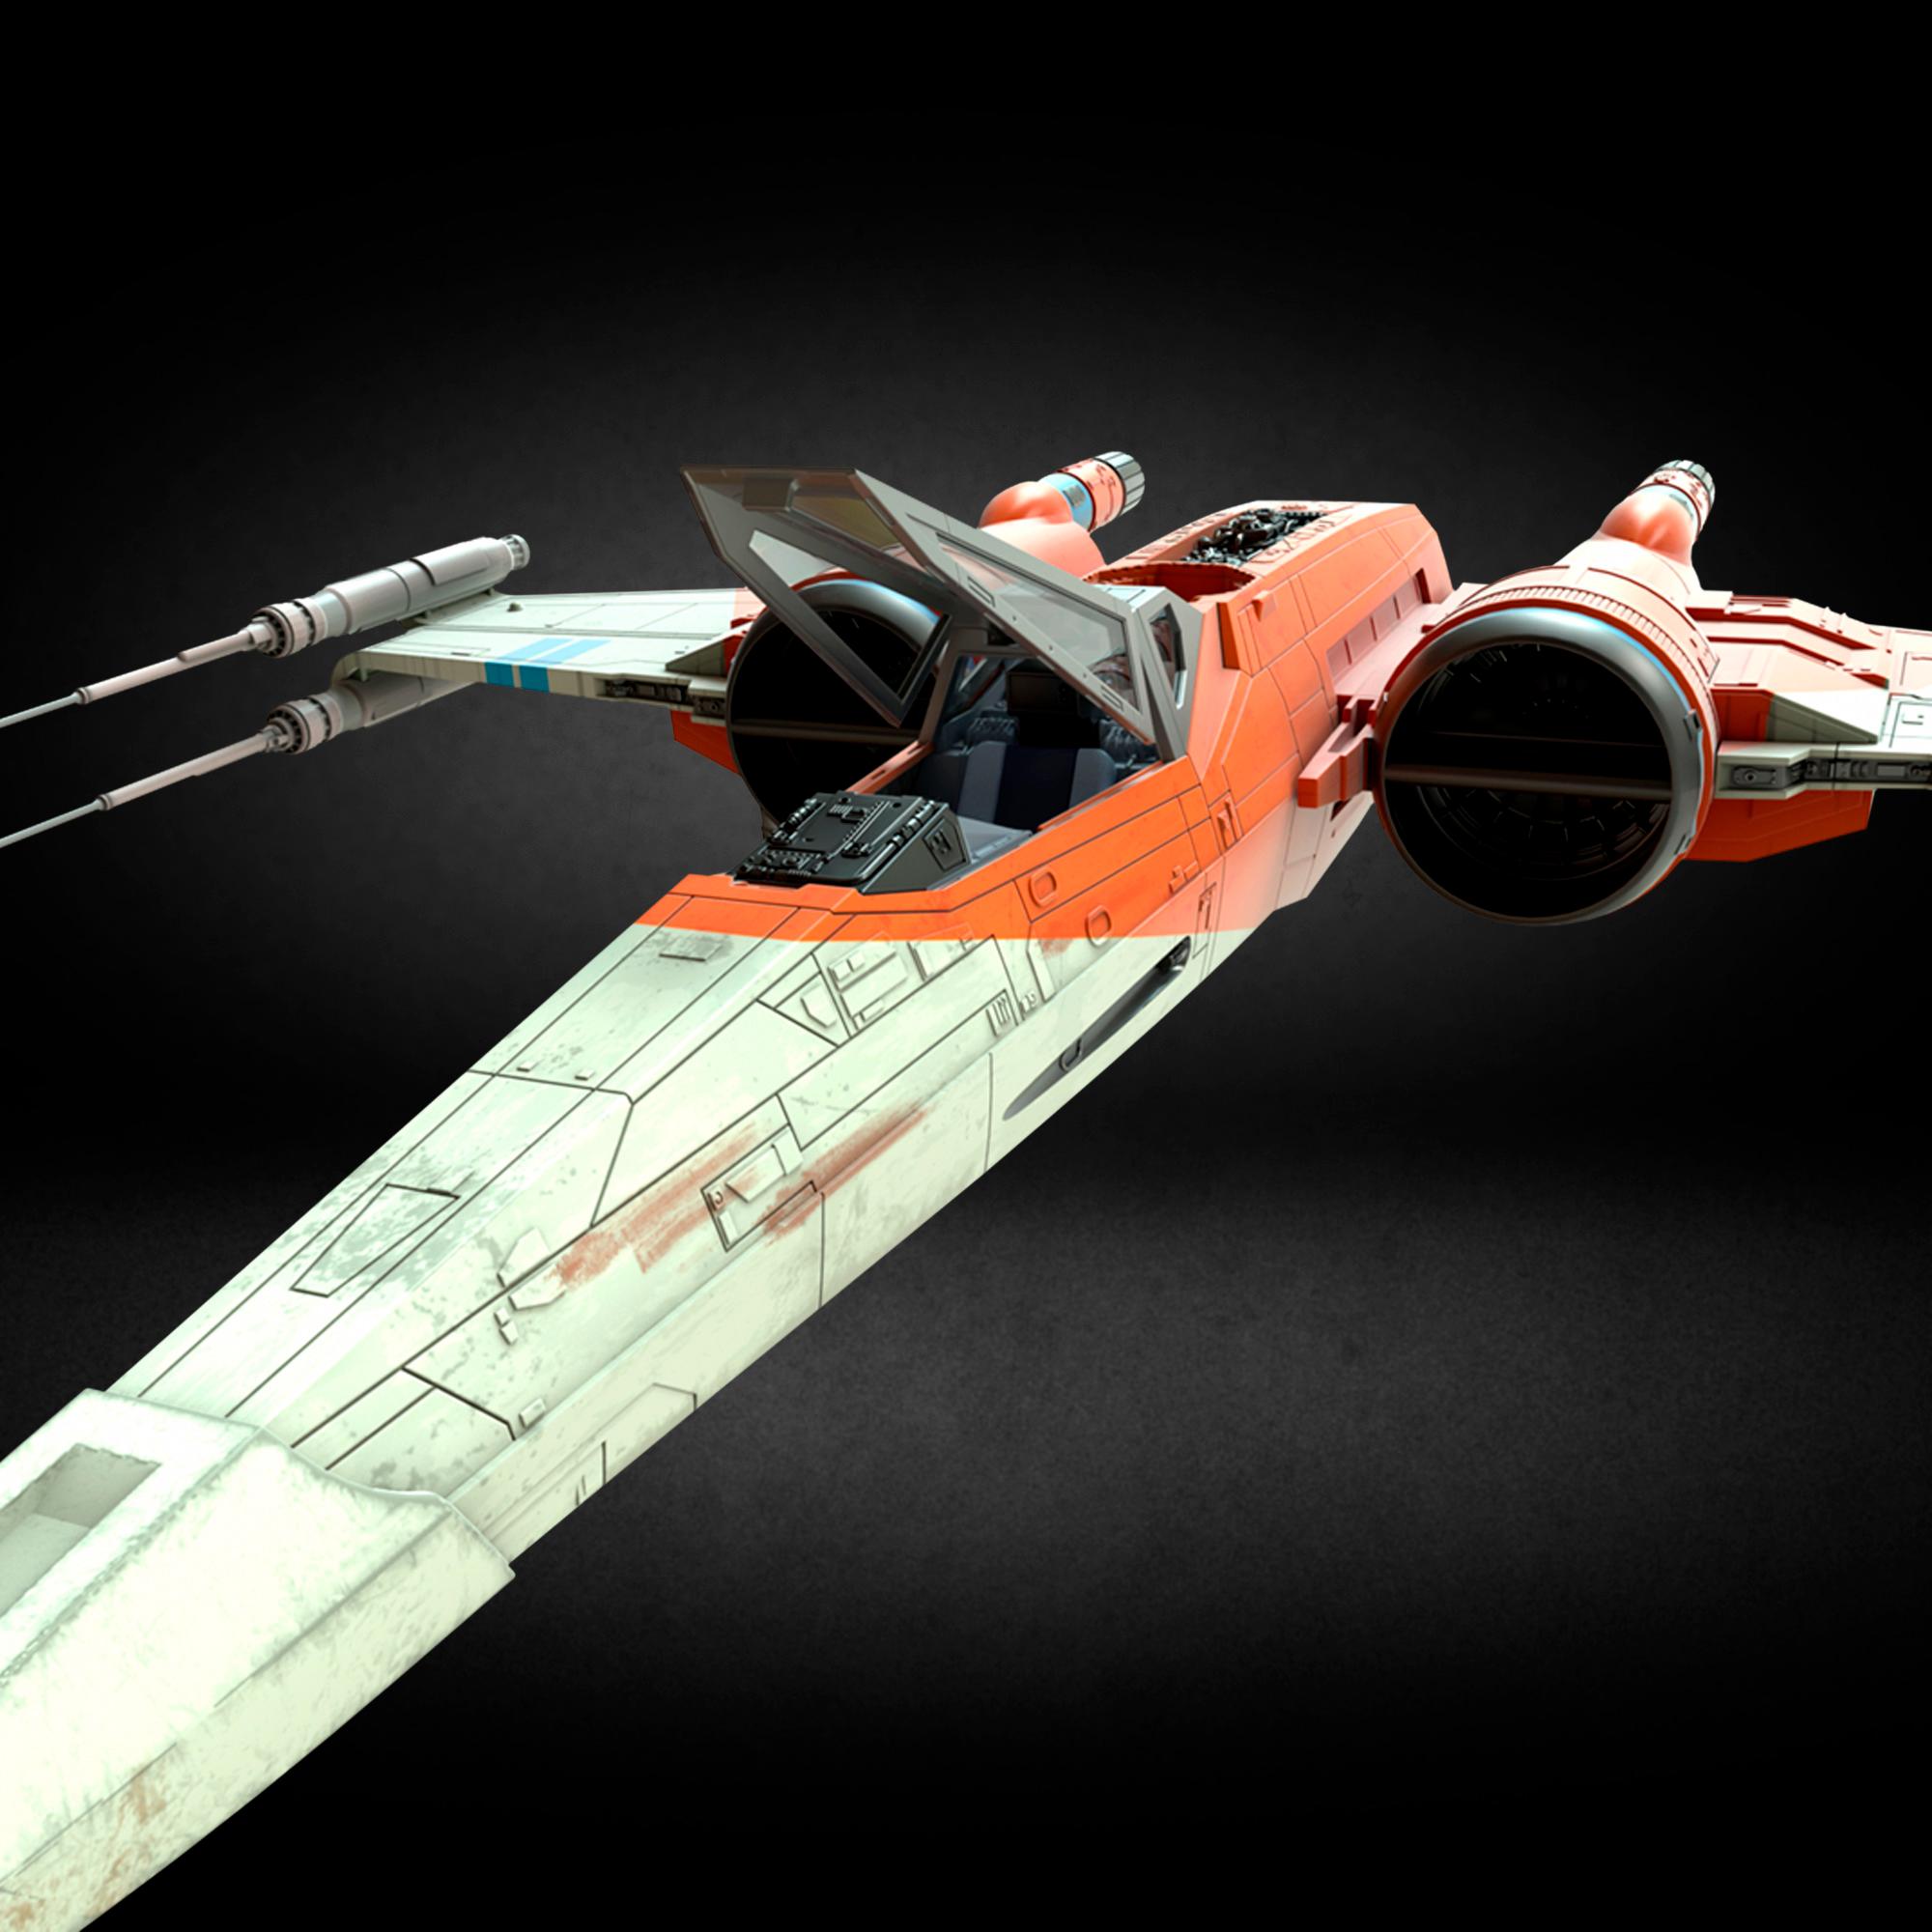 The Rise of Skywalker Vintage Colle... Poe Dameron's X-Wing Fighter Star Wars 